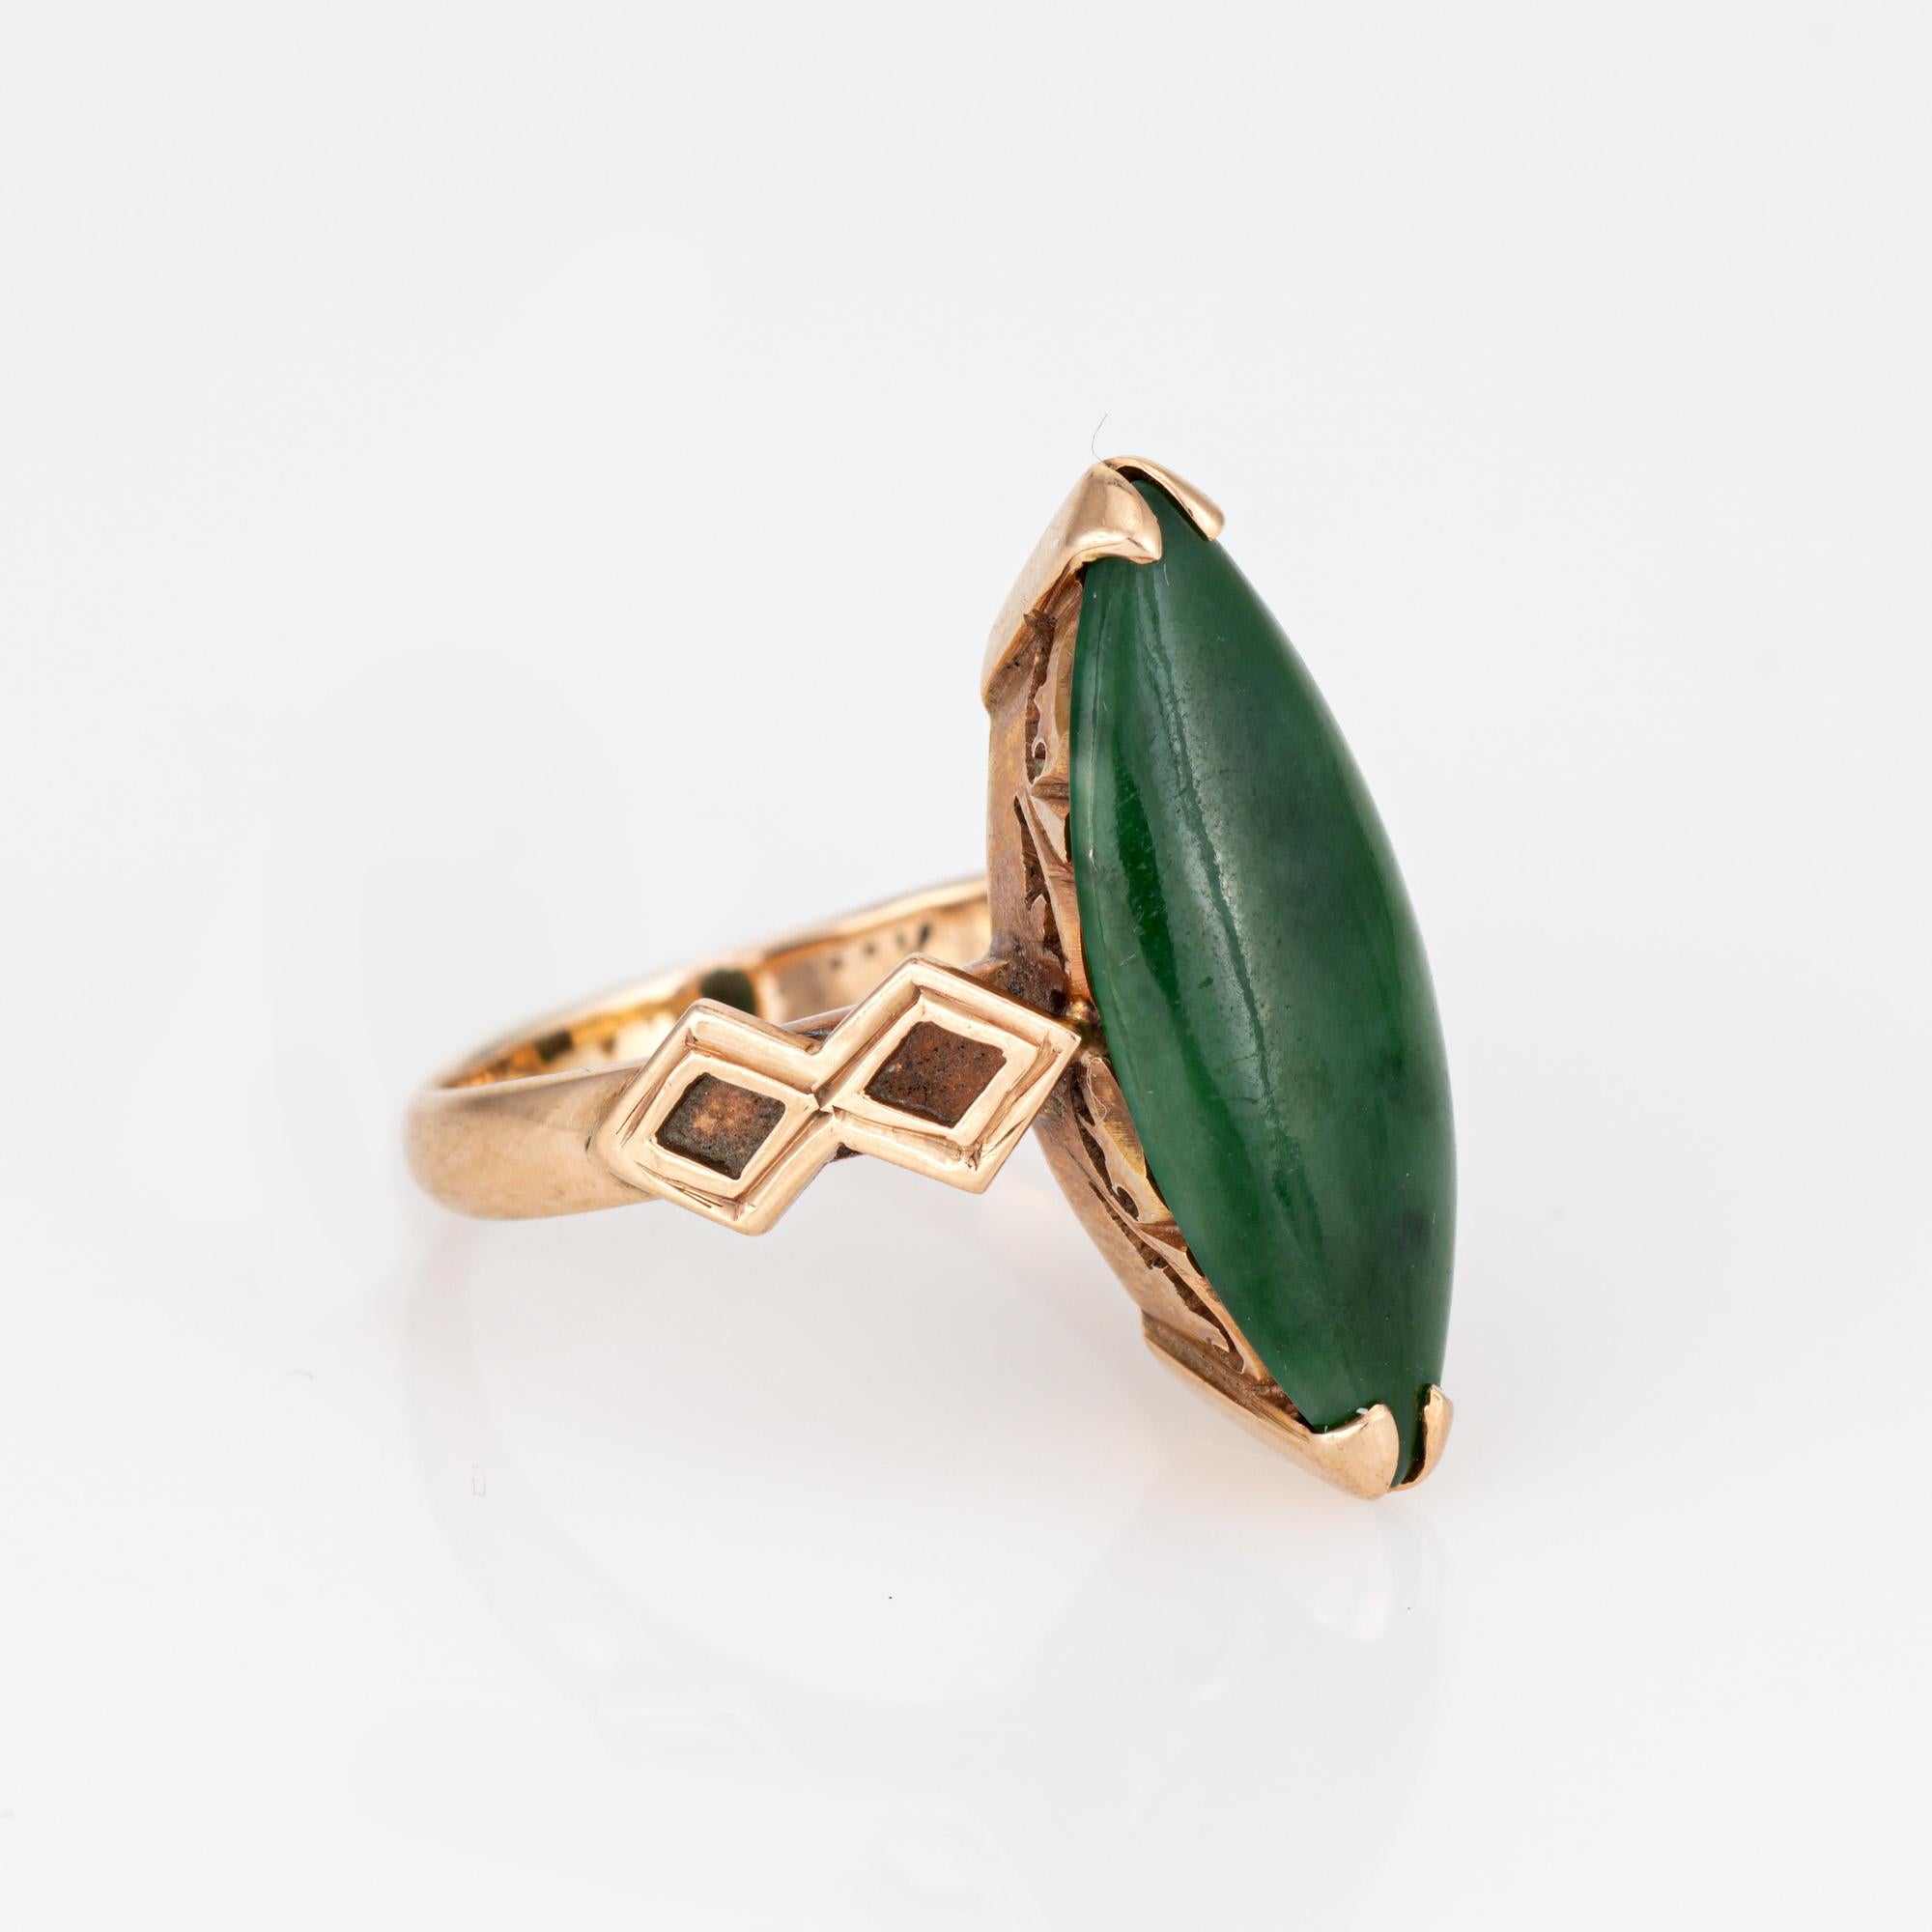 Modern Stylish Vintage Jade Navette Style Cocktail Ring 'circa 1960s' Crafted in 14 Kar For Sale